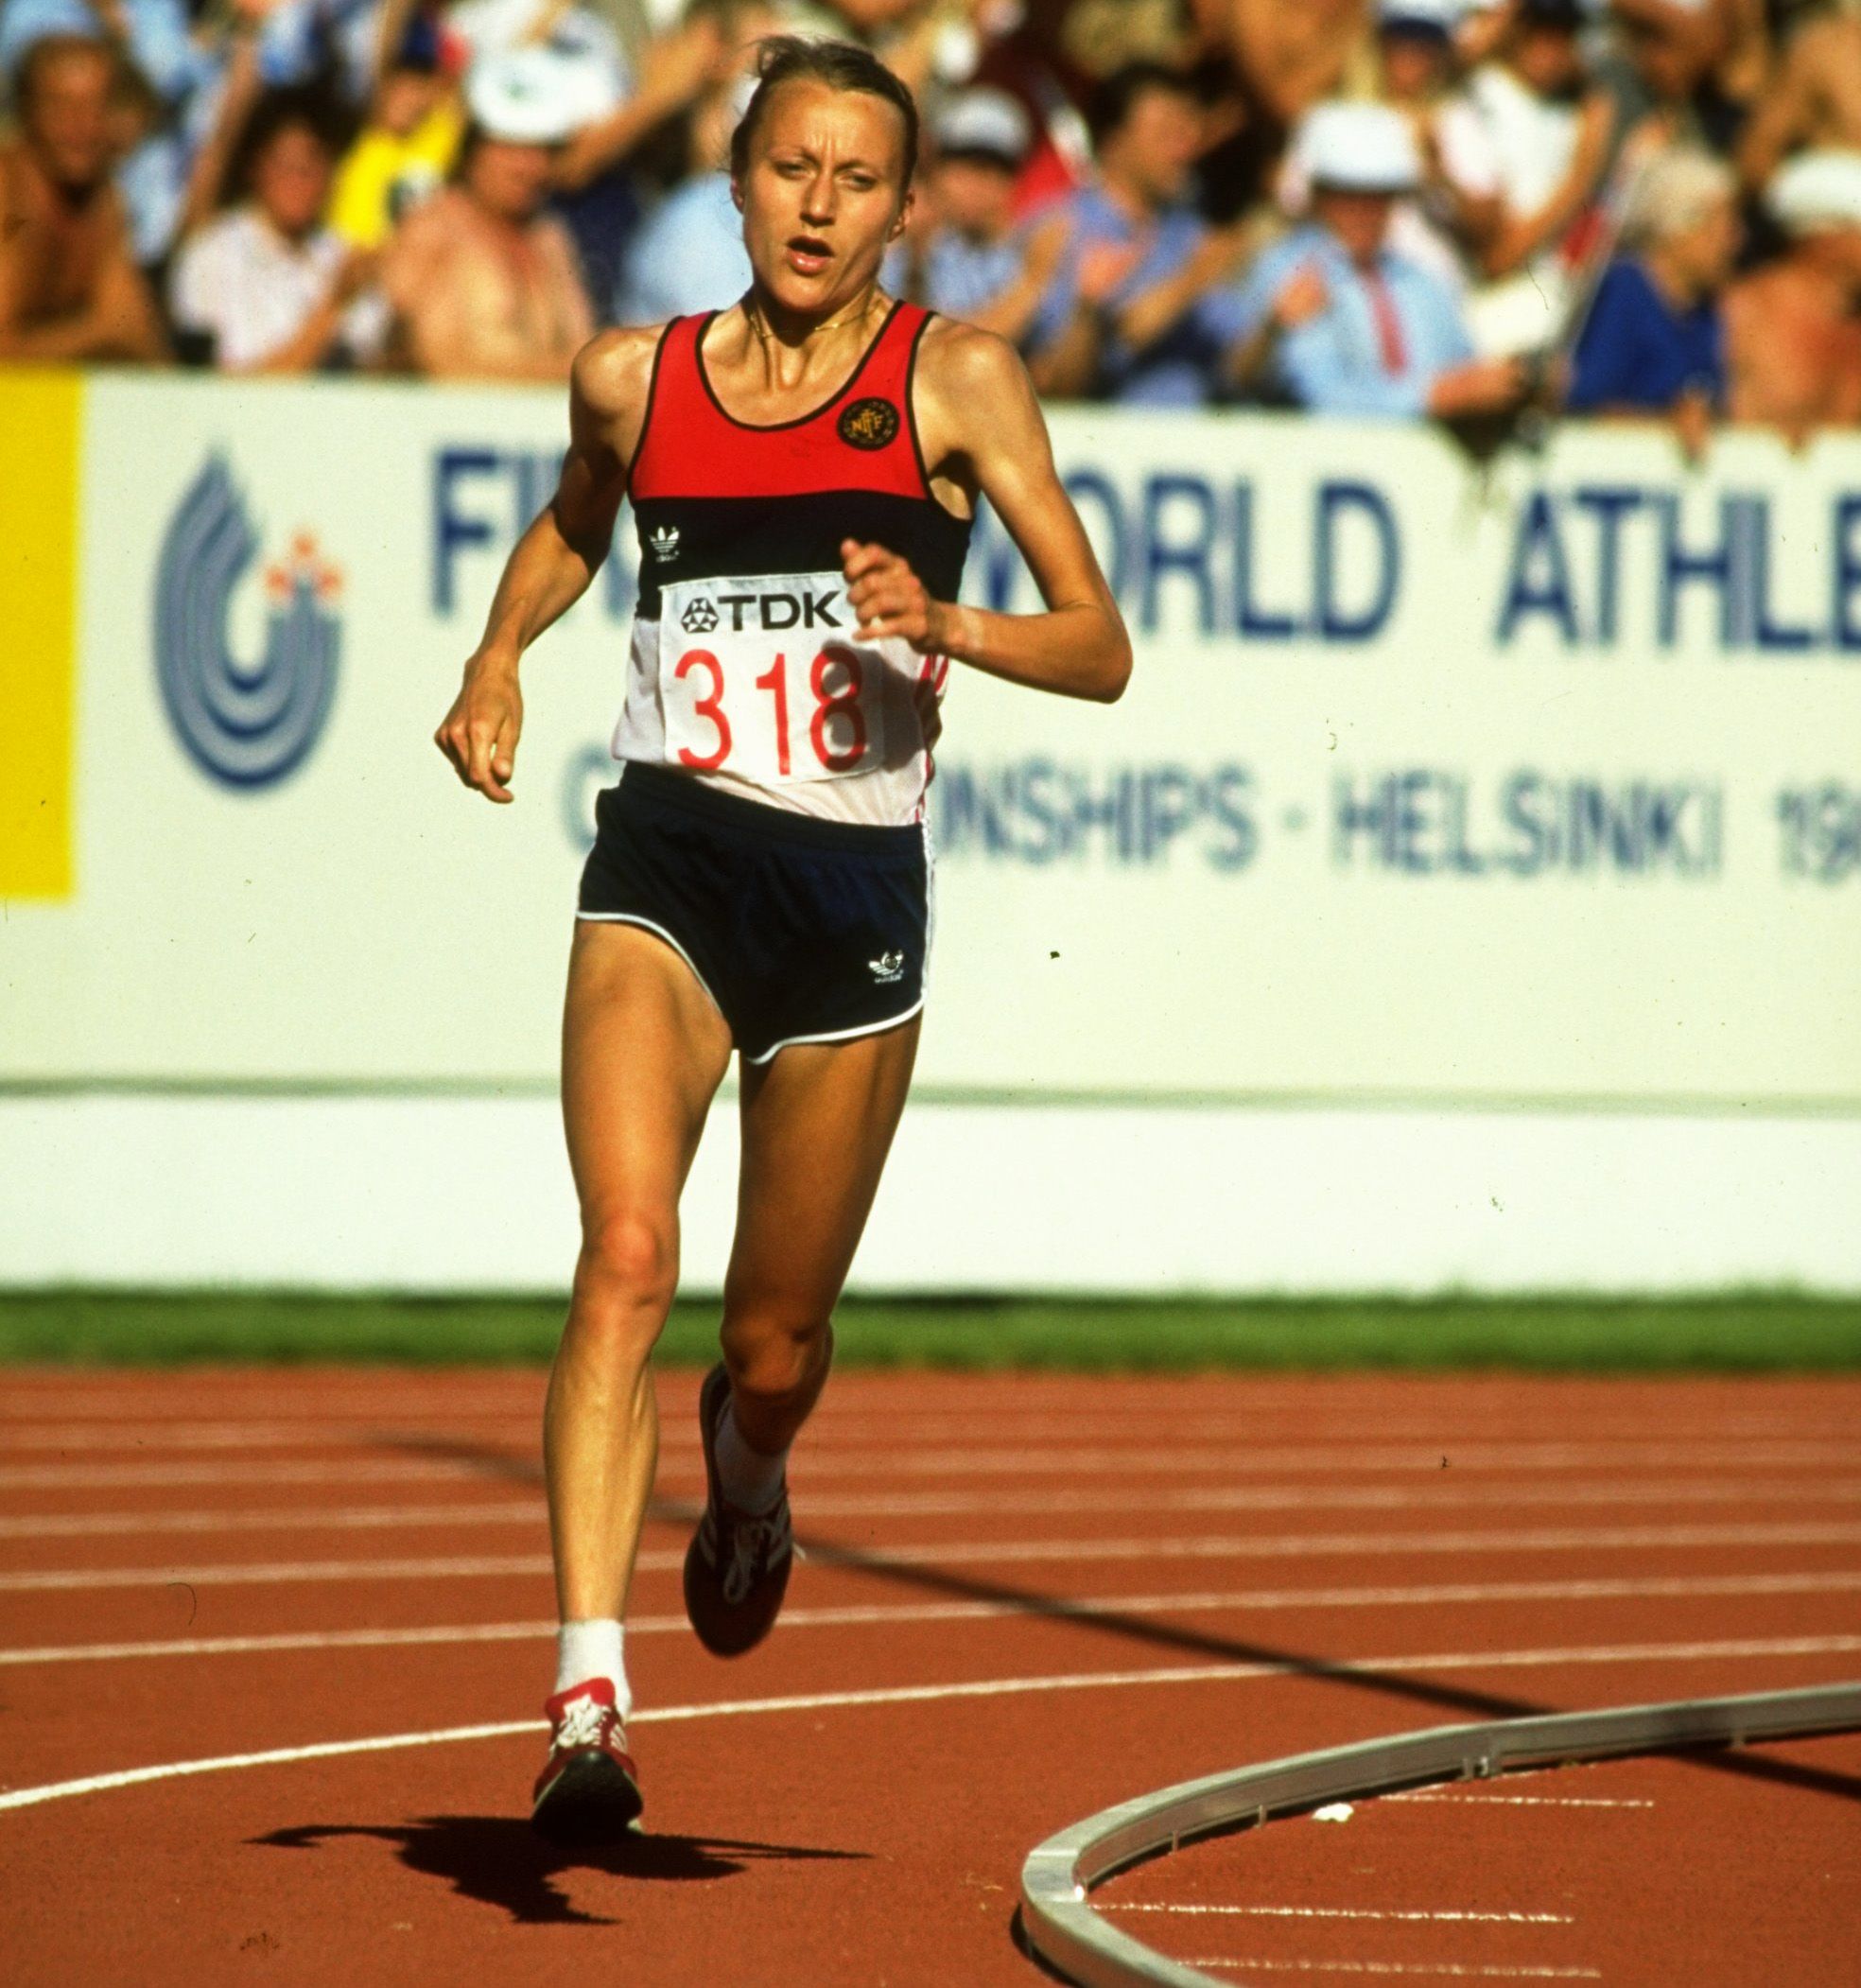 Grete Waitz on her way to marathon victory at the inaugural World Championships in Helsinki